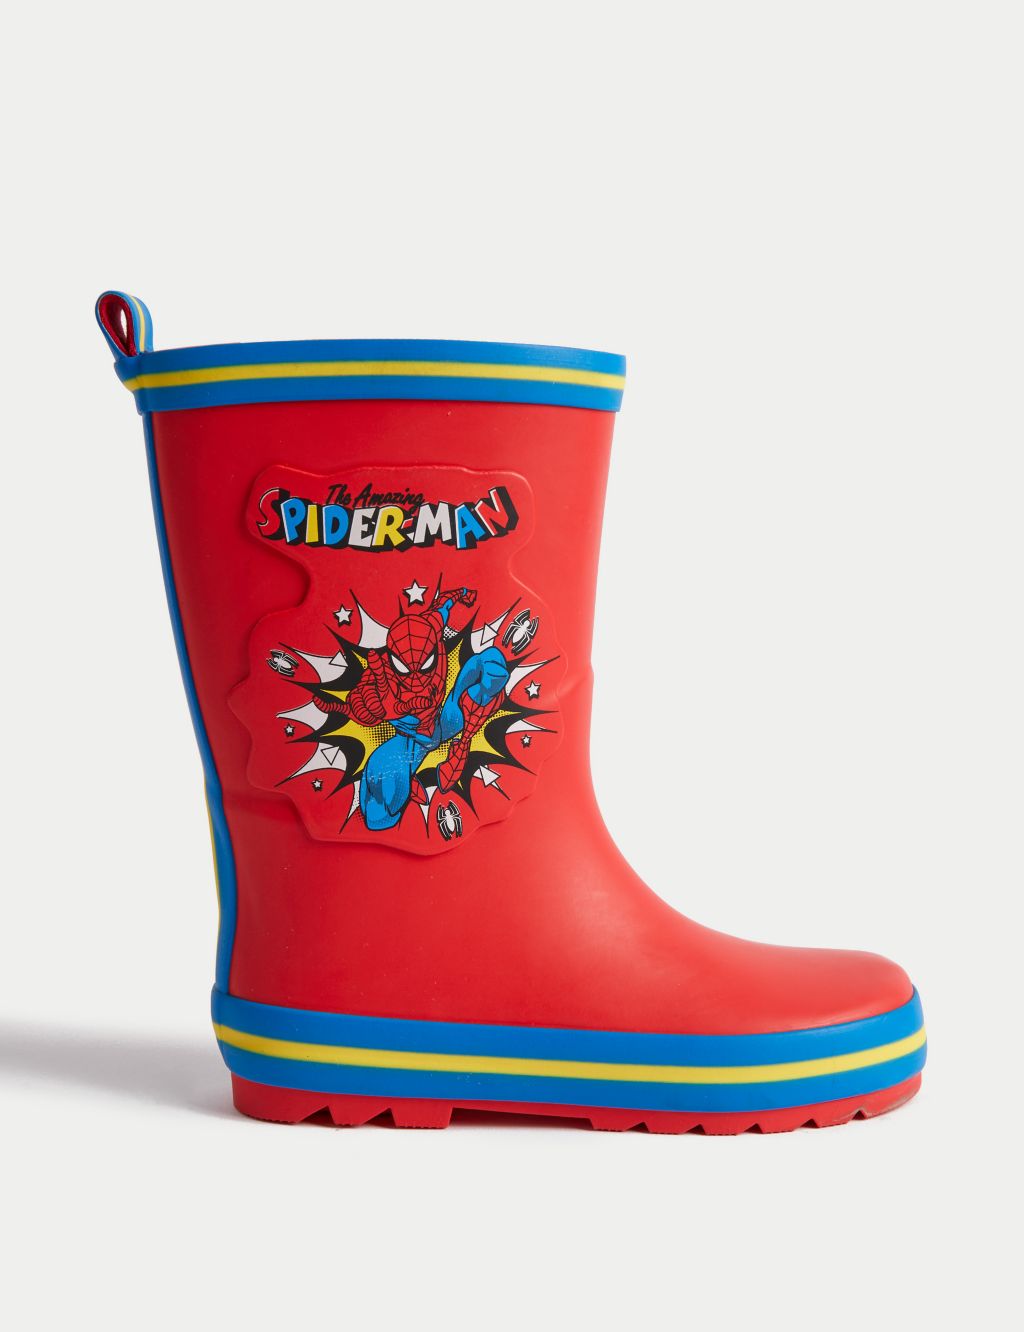 Kids' Spider-Man™ Wellies (4 Small - 13 Small) image 1